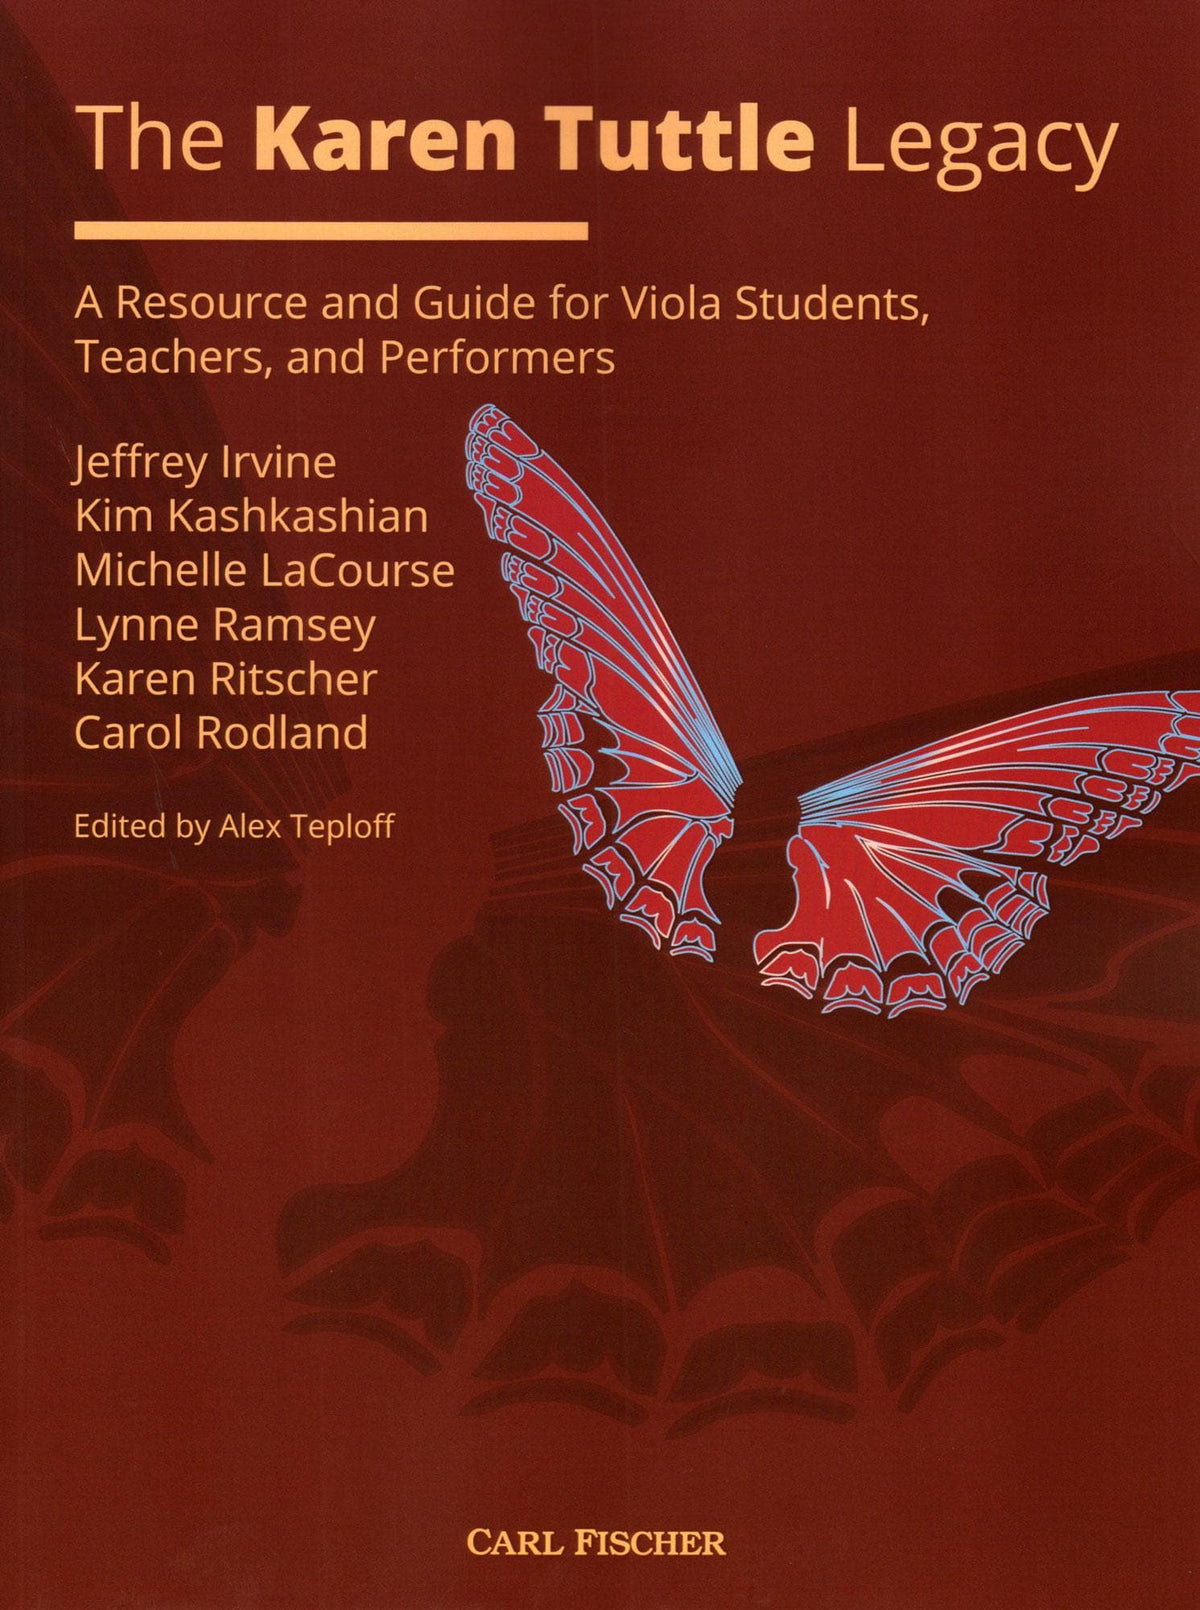 The Karen Tuttle Legacy: A Resource and Guide for Viola Students, Teachers, and Performers